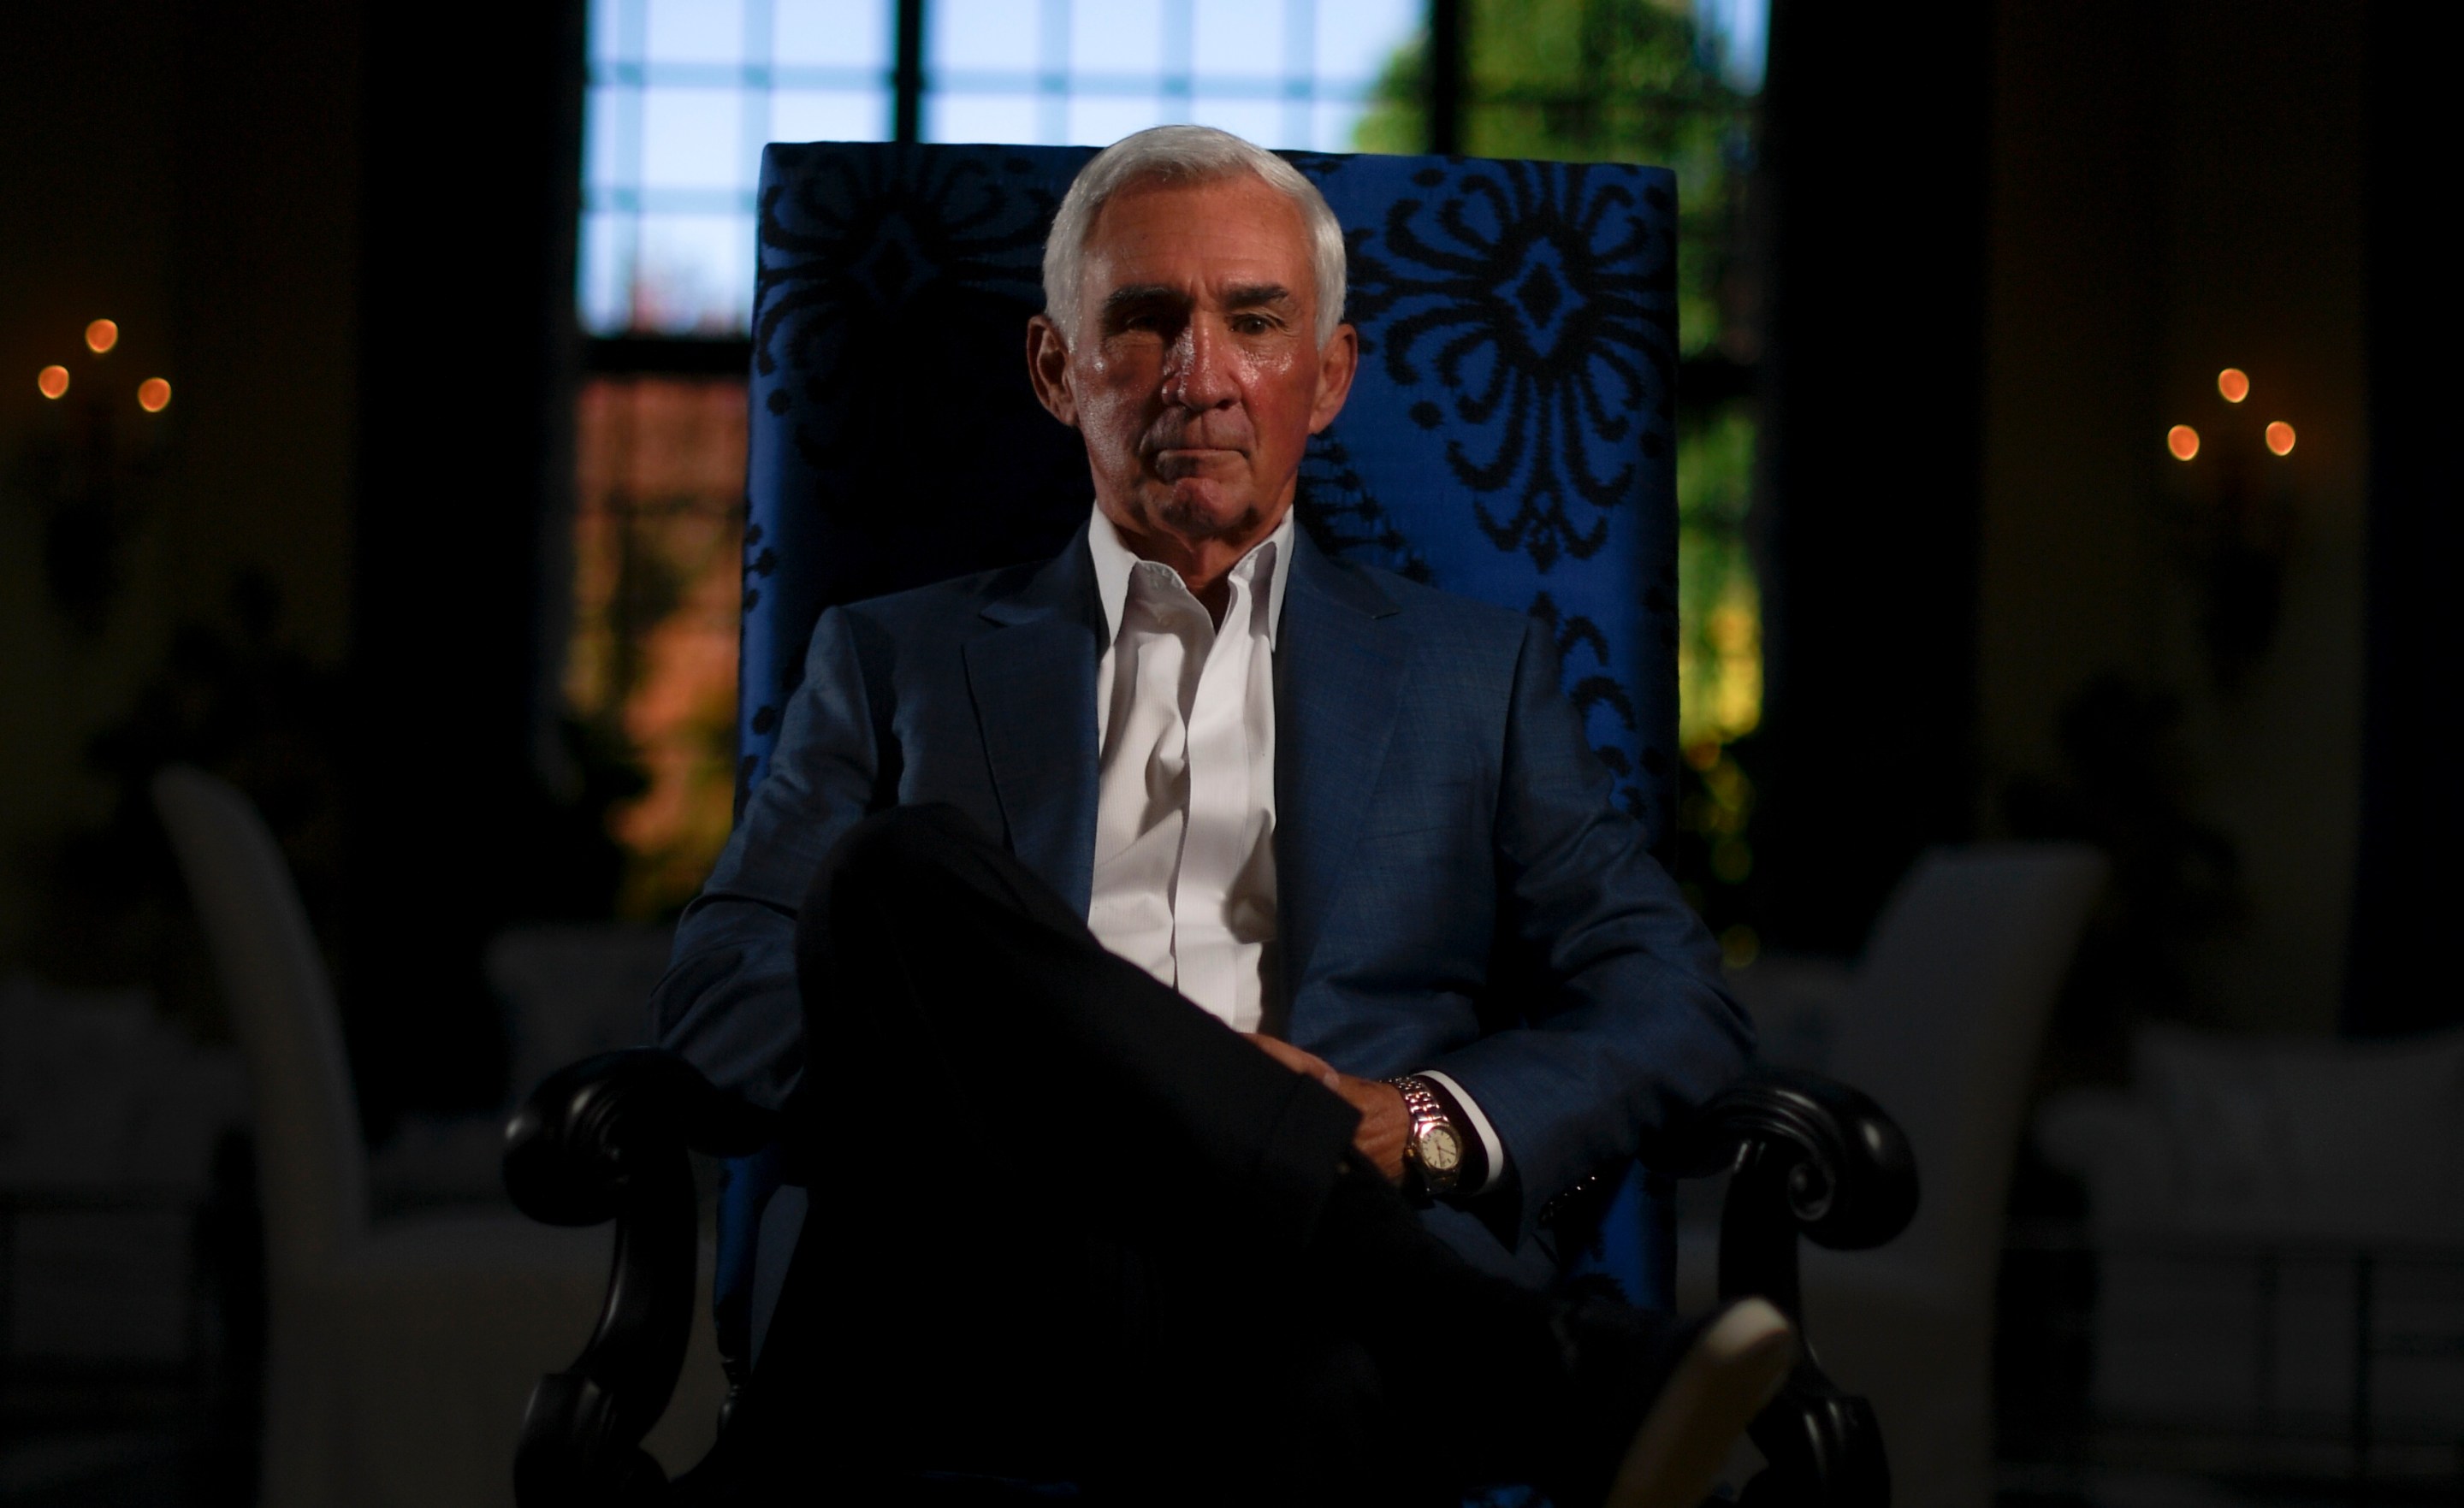 CHERRY HILLS VILLAGE, CO - OCTOBER 13: Former Denver Broncos head coach Mike Shanahan poses for a portrait at his home on Wednesday, October 13, 2021. Shanahan, who won back to back Super Bowls as Denver’s head coach in the 1990s, will be inducted into the team’s ring of fame during the Broncos’ matchup with the Las Vegas Raiders on Sunday. (Photo by AAron Ontiveroz/The Denver Post)